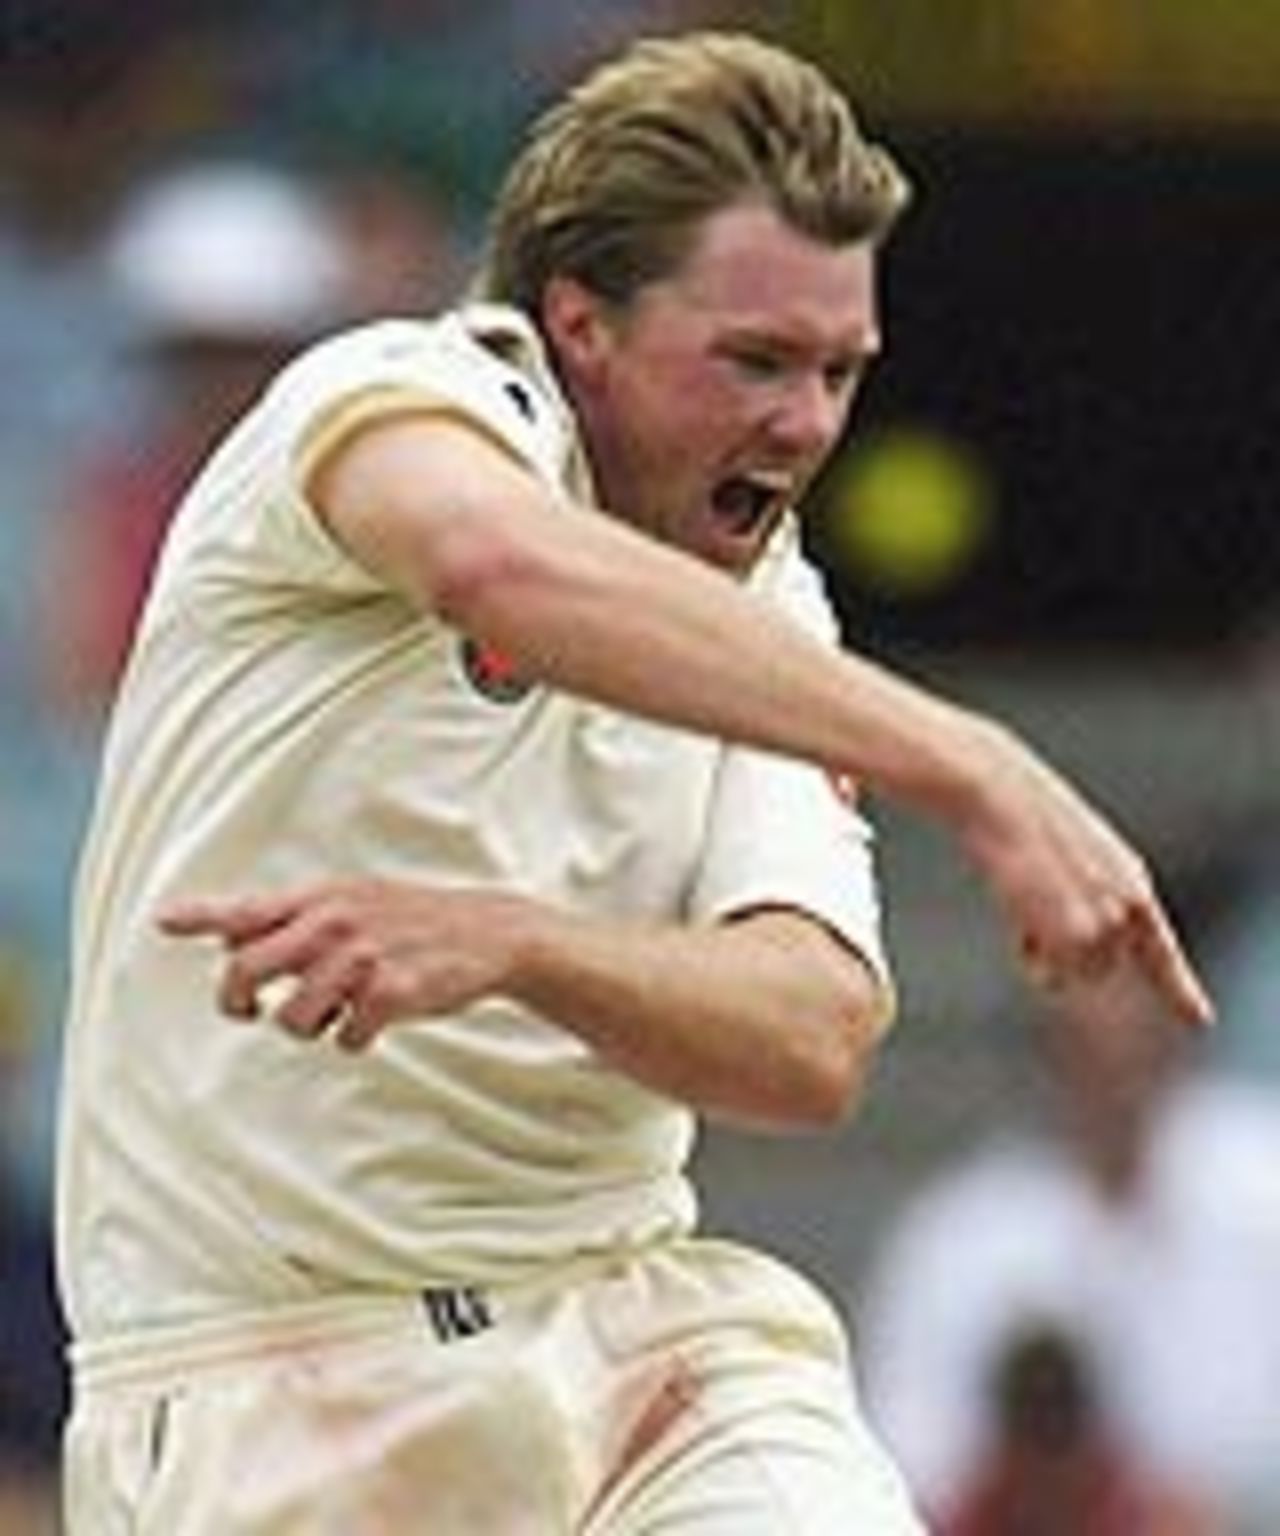 Brad Williams celebrates after getting rid of Zaheer Khan, Australia v India, 3rd Test, Melbourne, 4th day, December 29, 2003